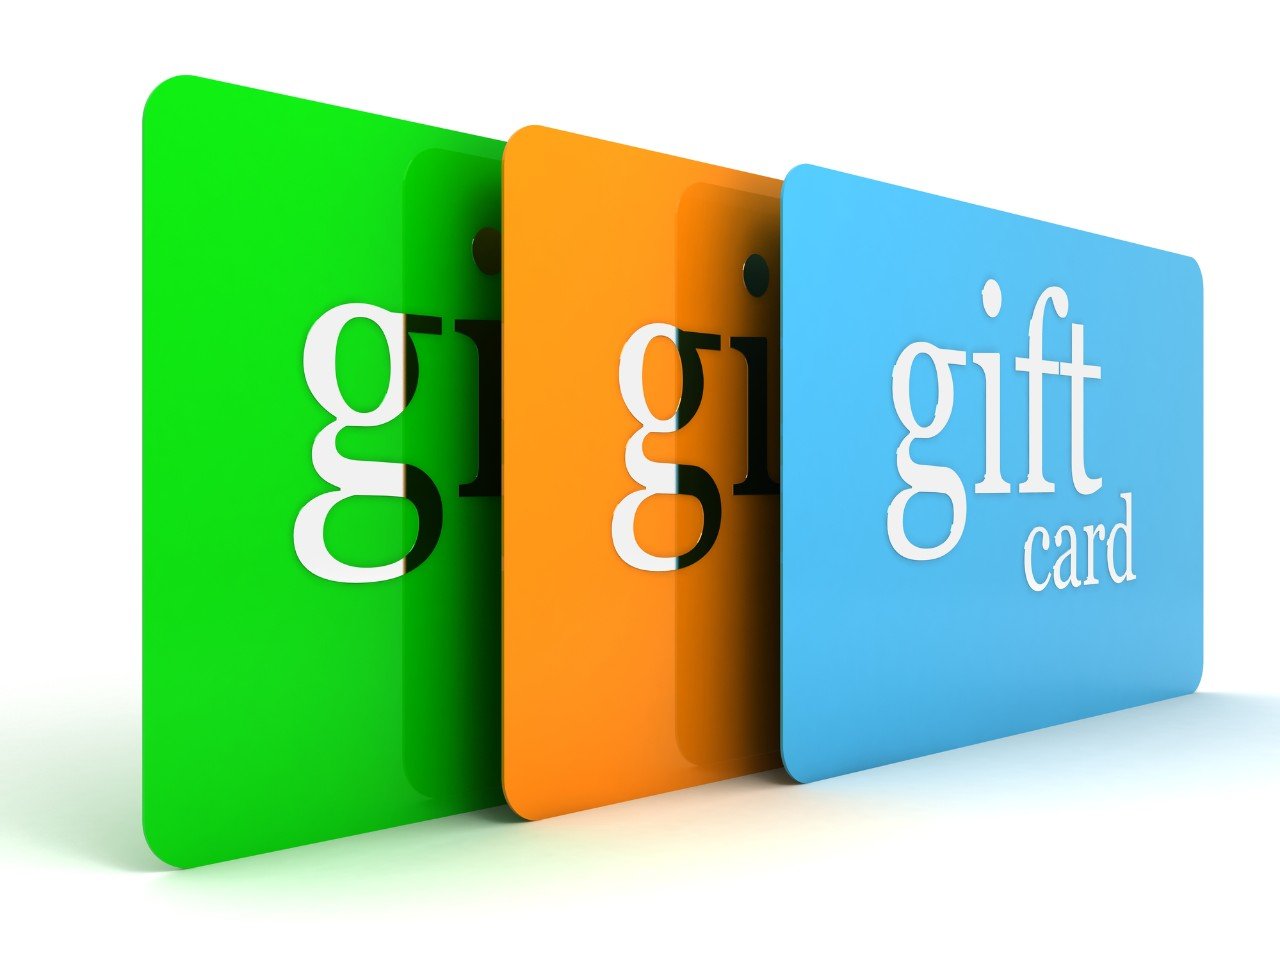 gift card -  gift card added a new photo.